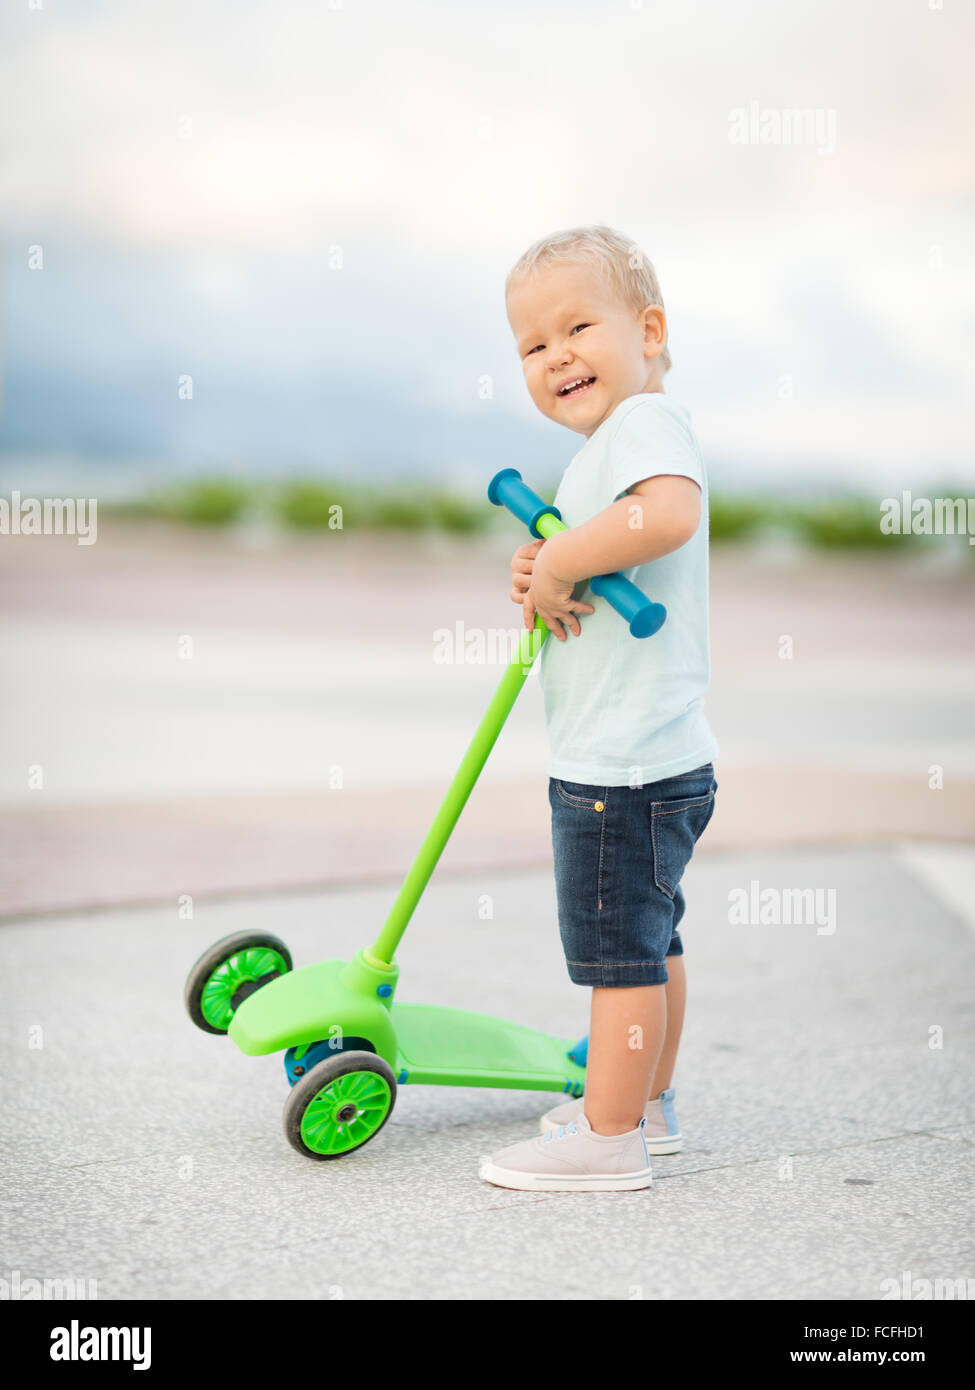 Boy with scooter outdoor. Leisure activity Stock Photo